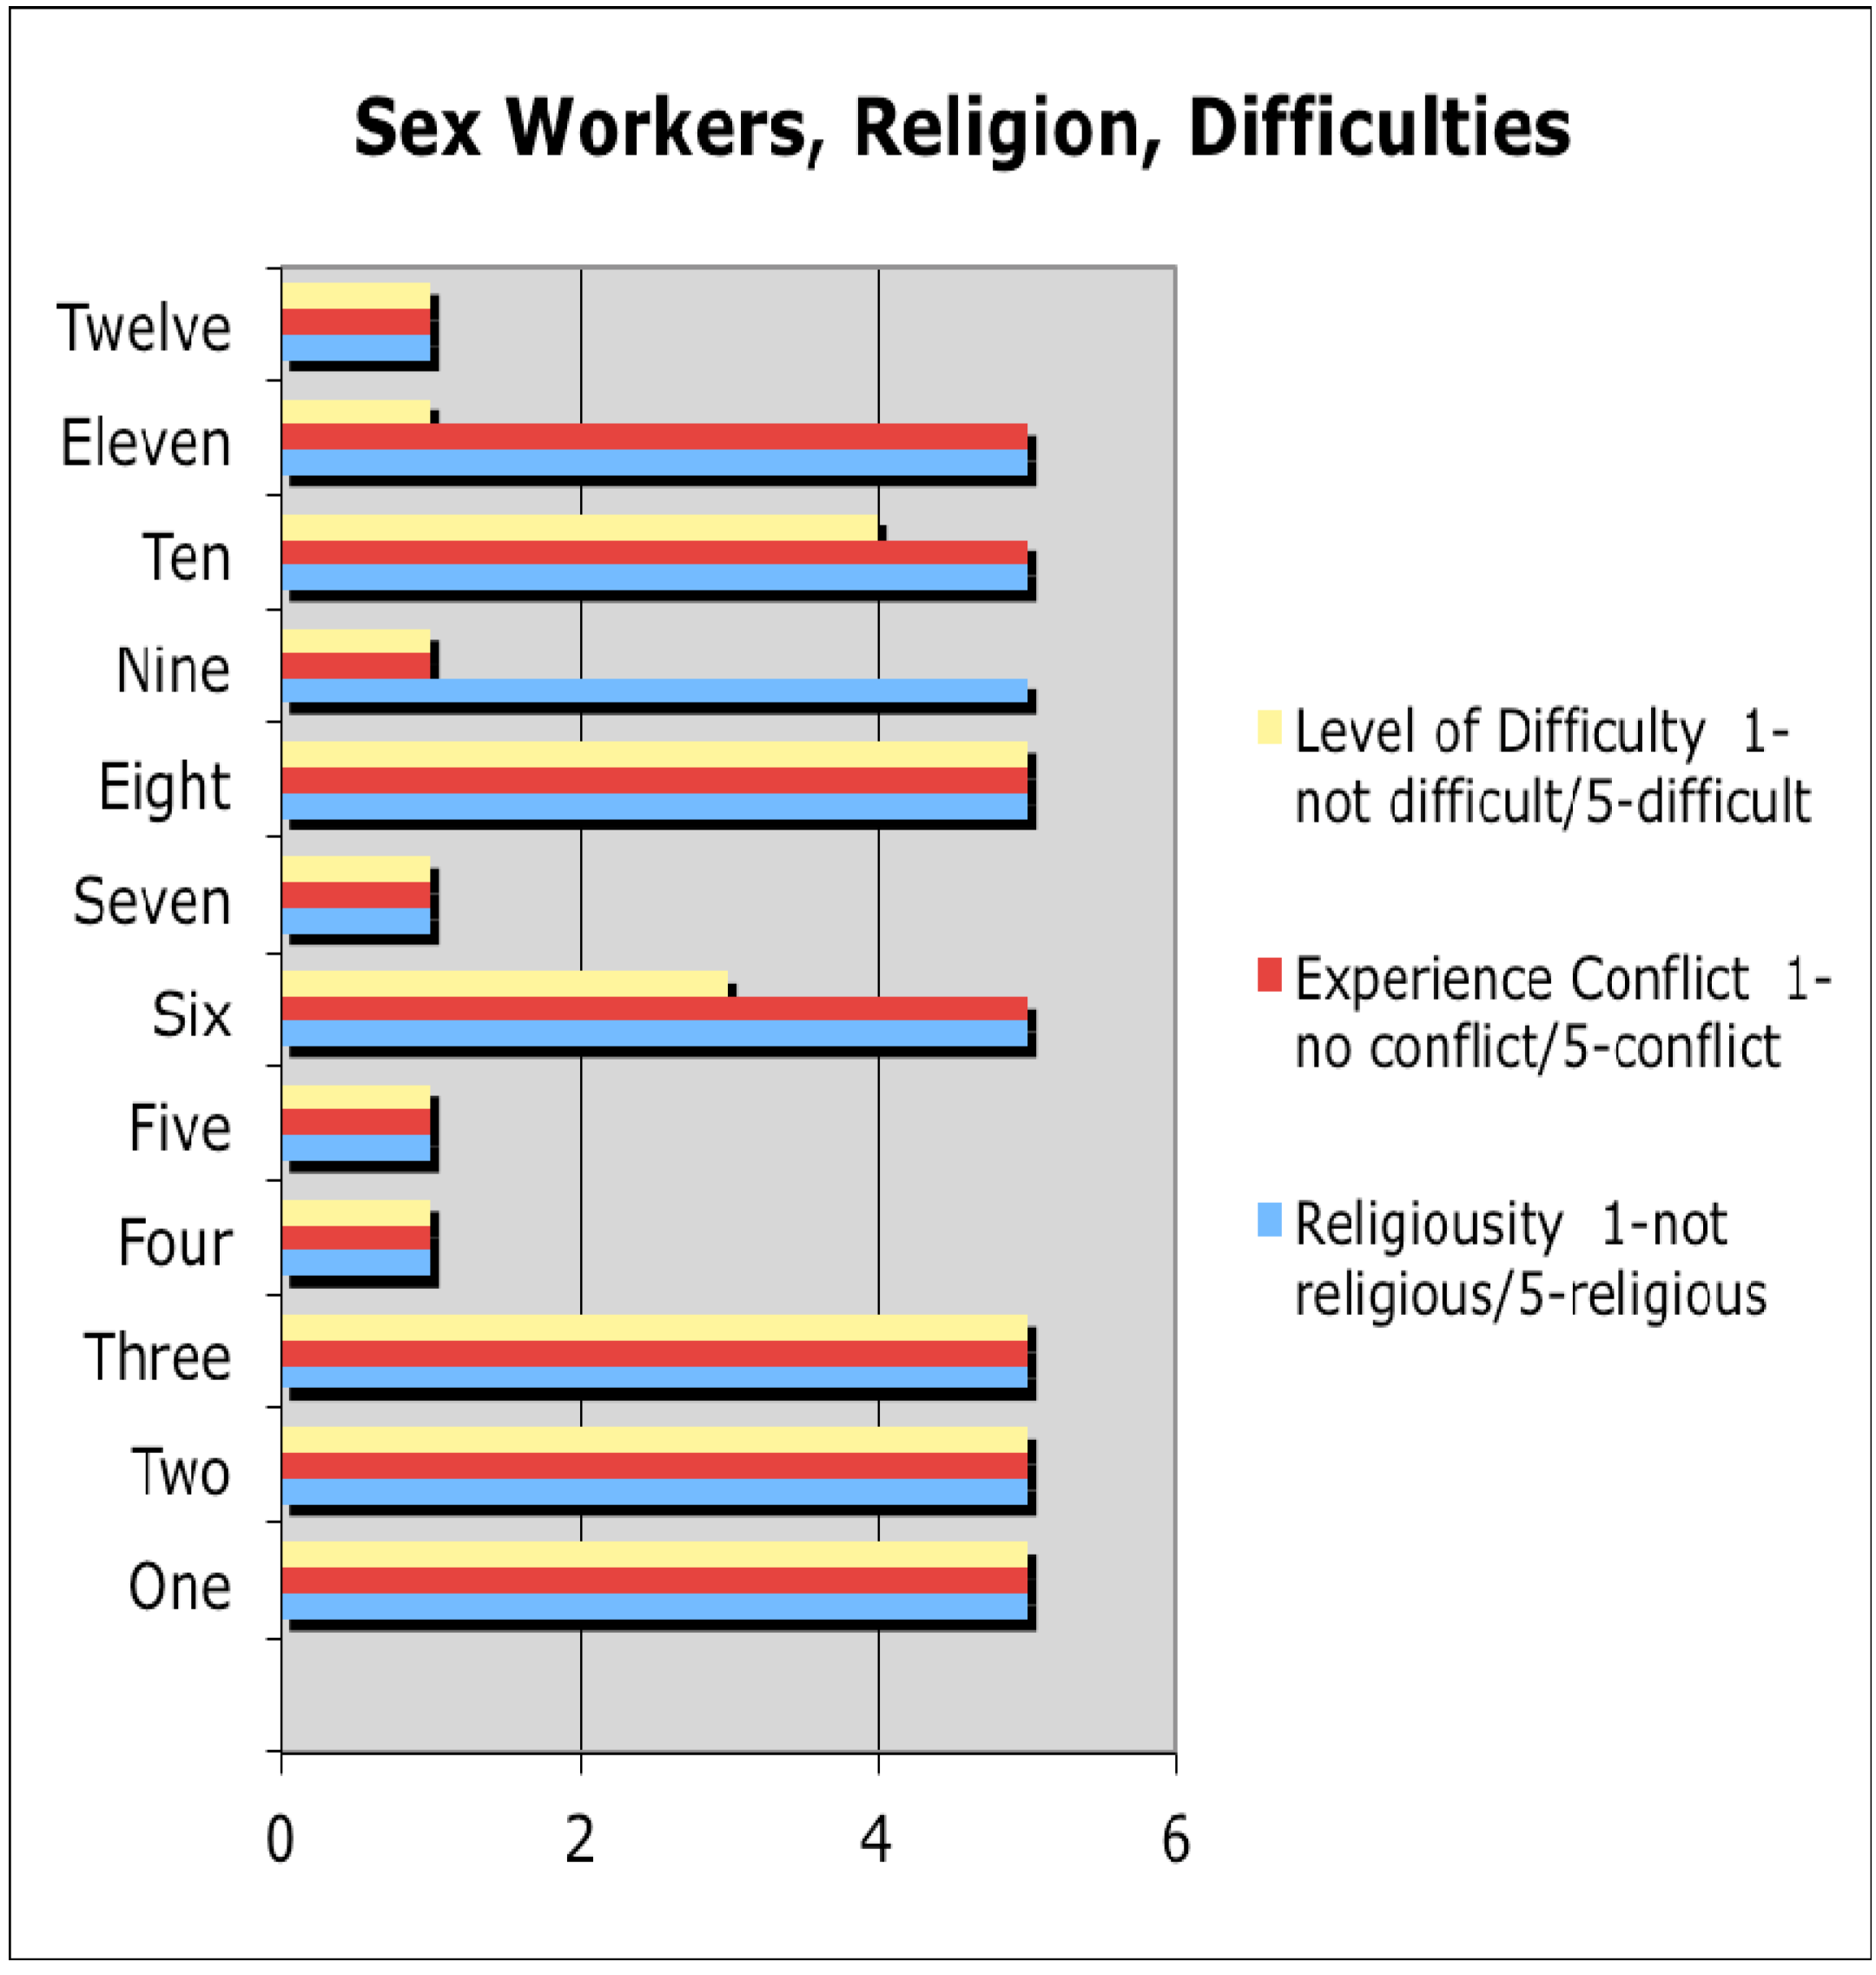 Religions Free Full-Text The Role of Religion among Sex Workers in Thailand pic